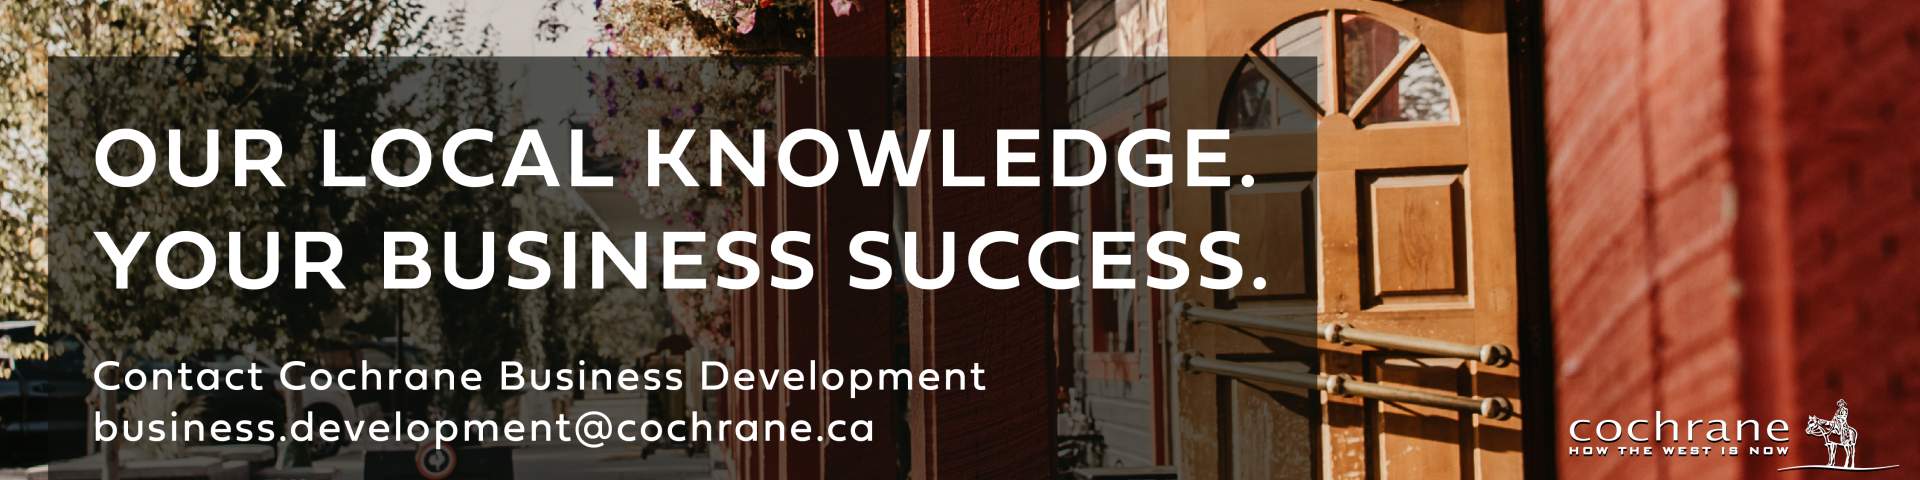 Our local knowledge. Your Business Success.